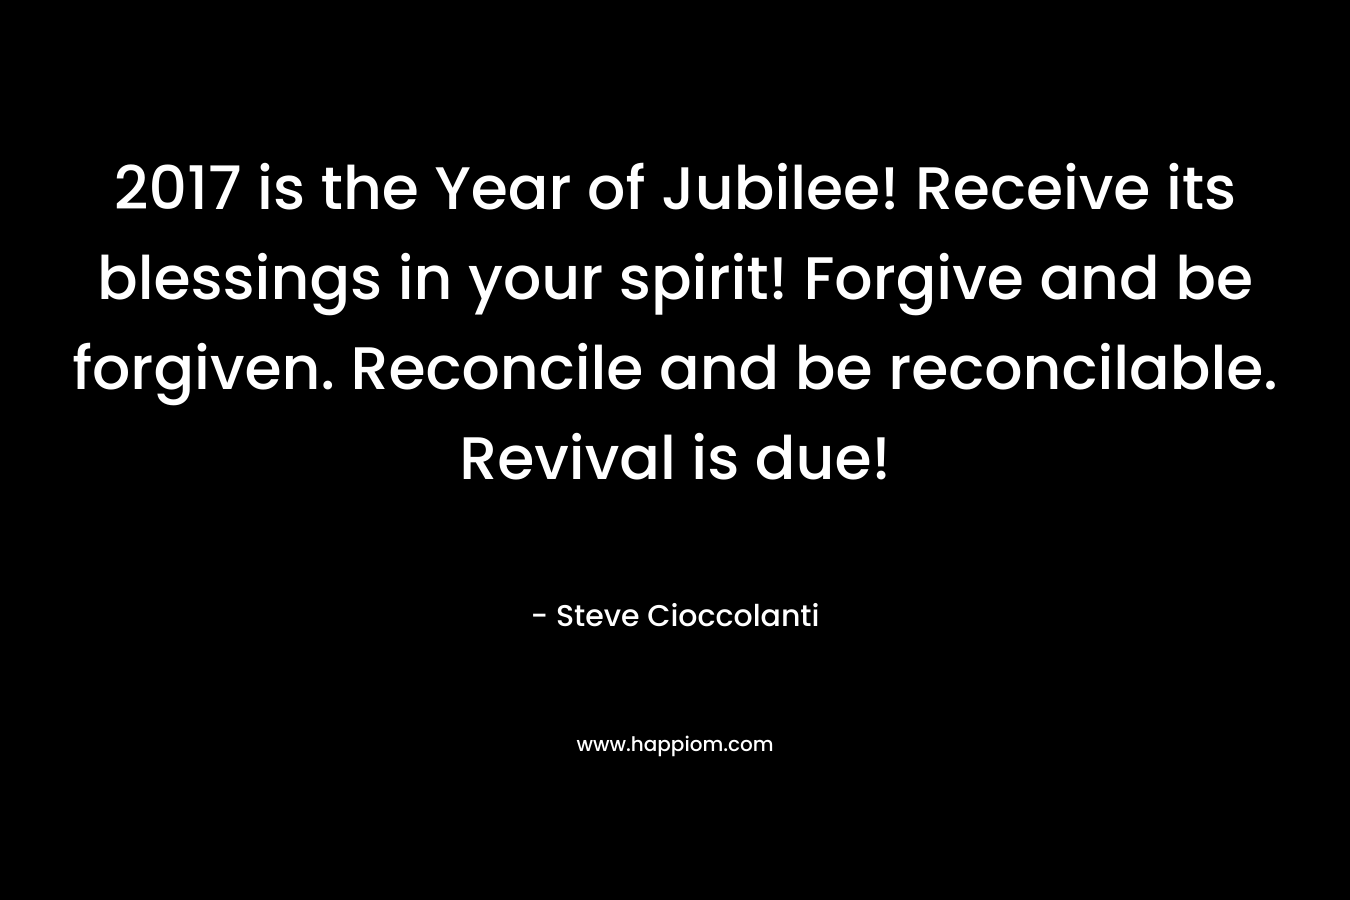 2017 is the Year of Jubilee! Receive its blessings in your spirit! Forgive and be forgiven. Reconcile and be reconcilable. Revival is due! – Steve Cioccolanti